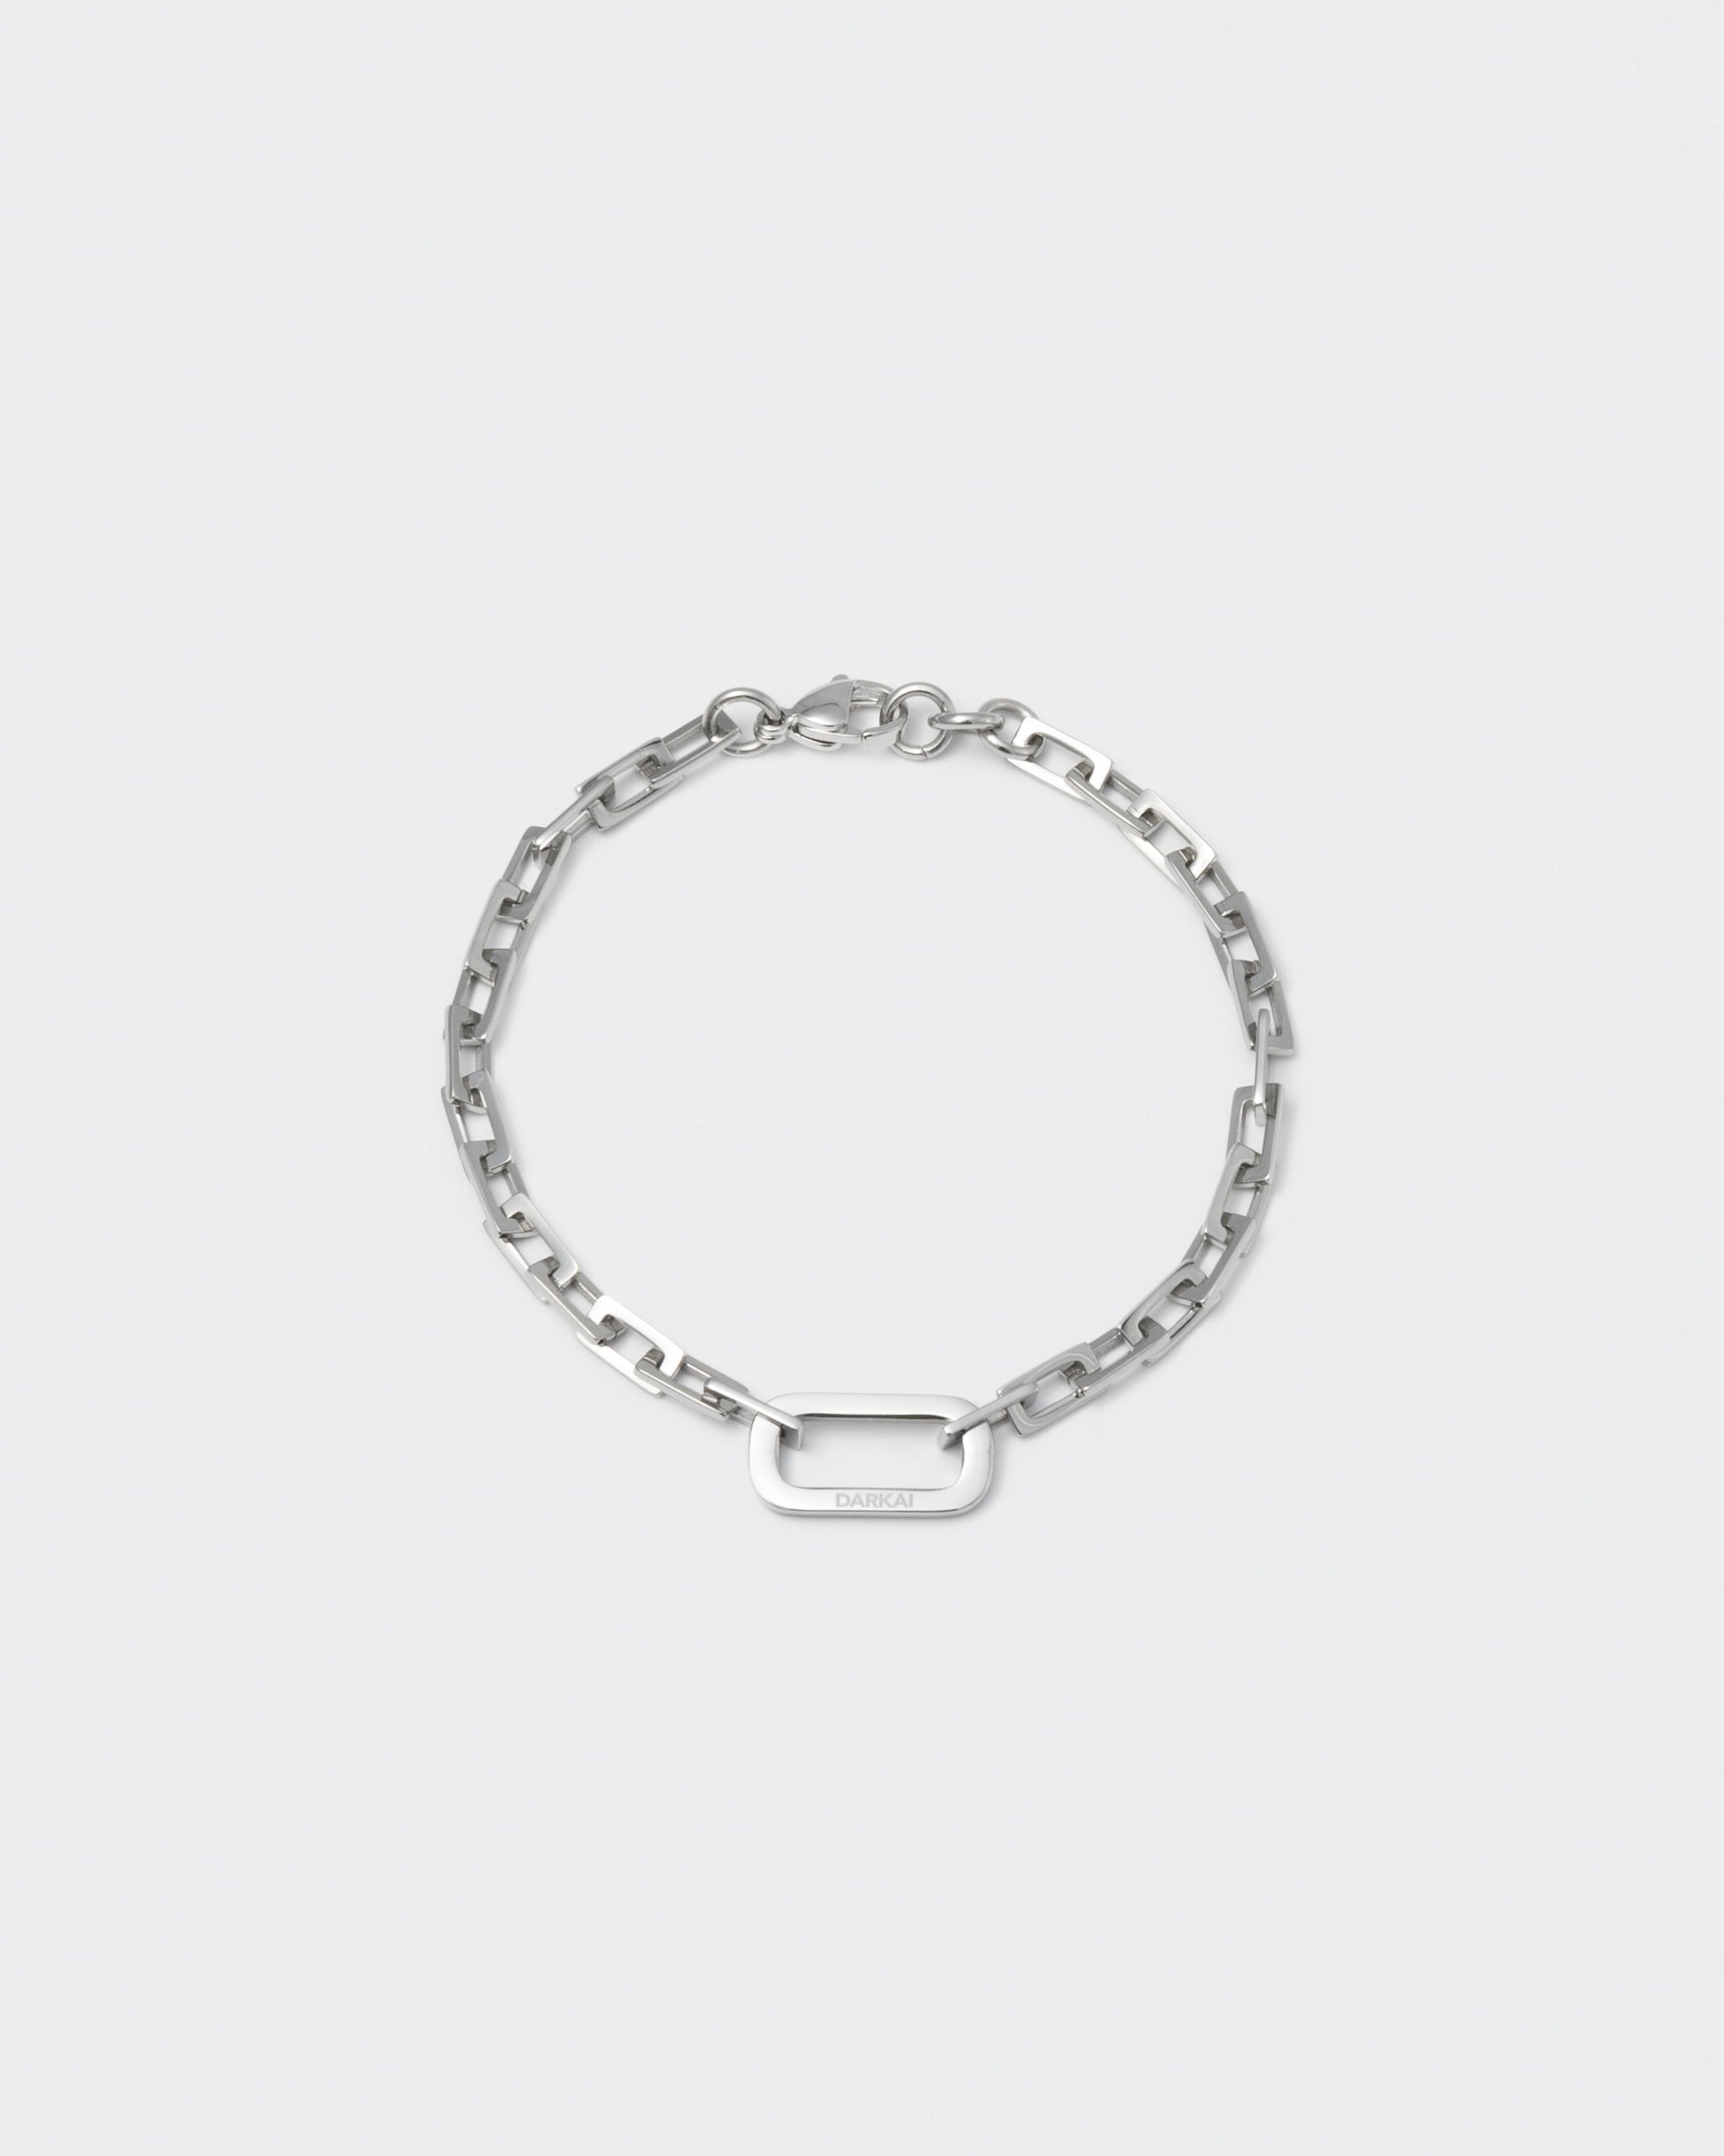 18k white gold coated edgy diamond finished rolo chain bracelet with central oval link detail and lobster clasp with logo